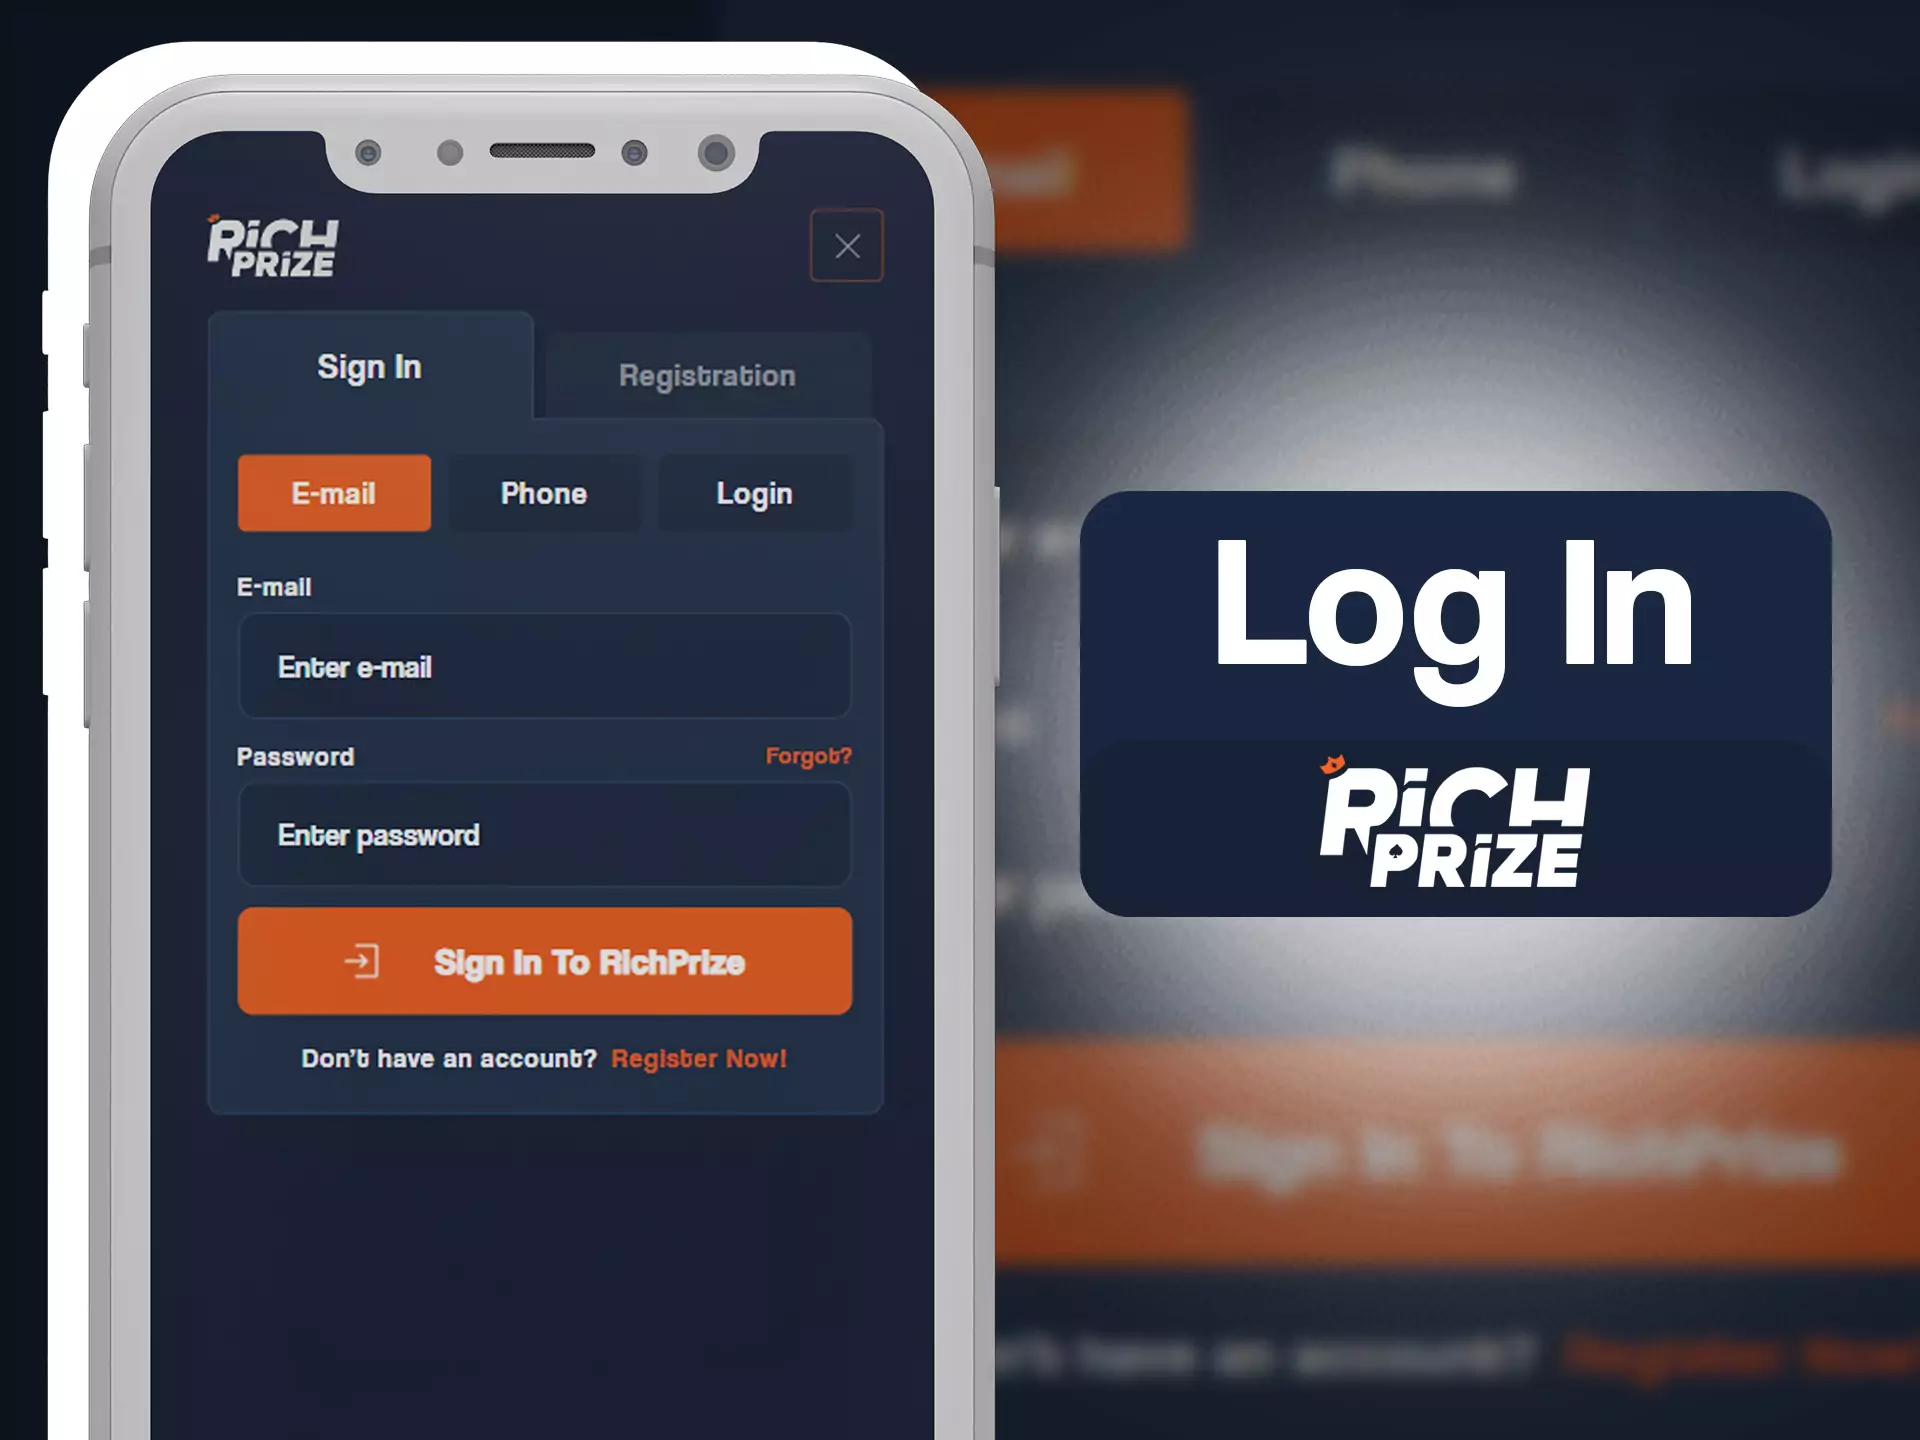 Log in RichPrize app to enter to the main page.